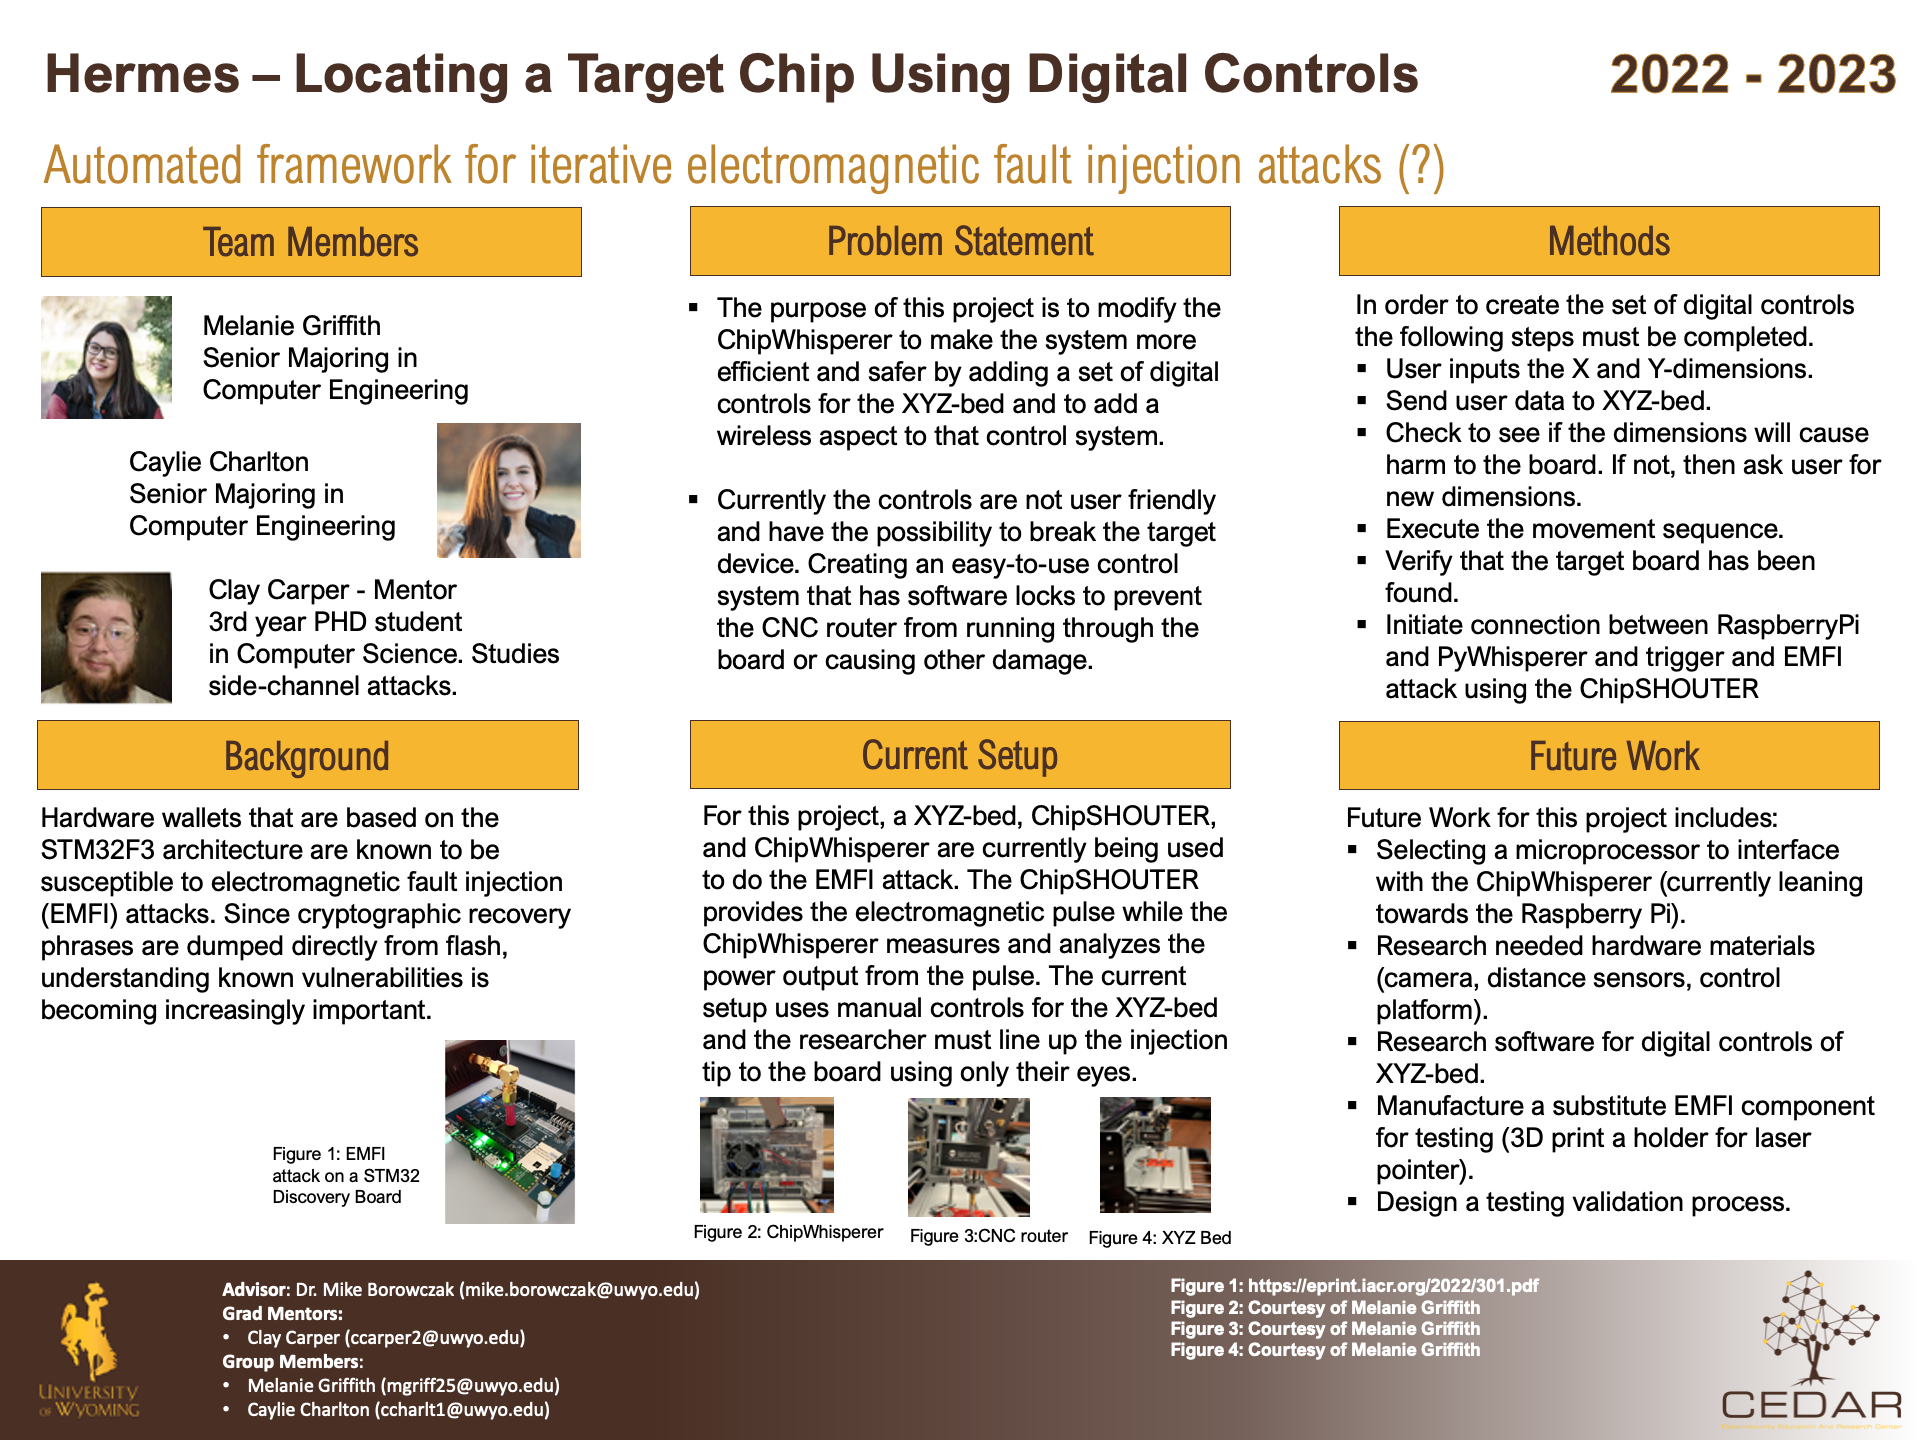  Poster for Hermes - Locating a Target Chip Using Digital Controls